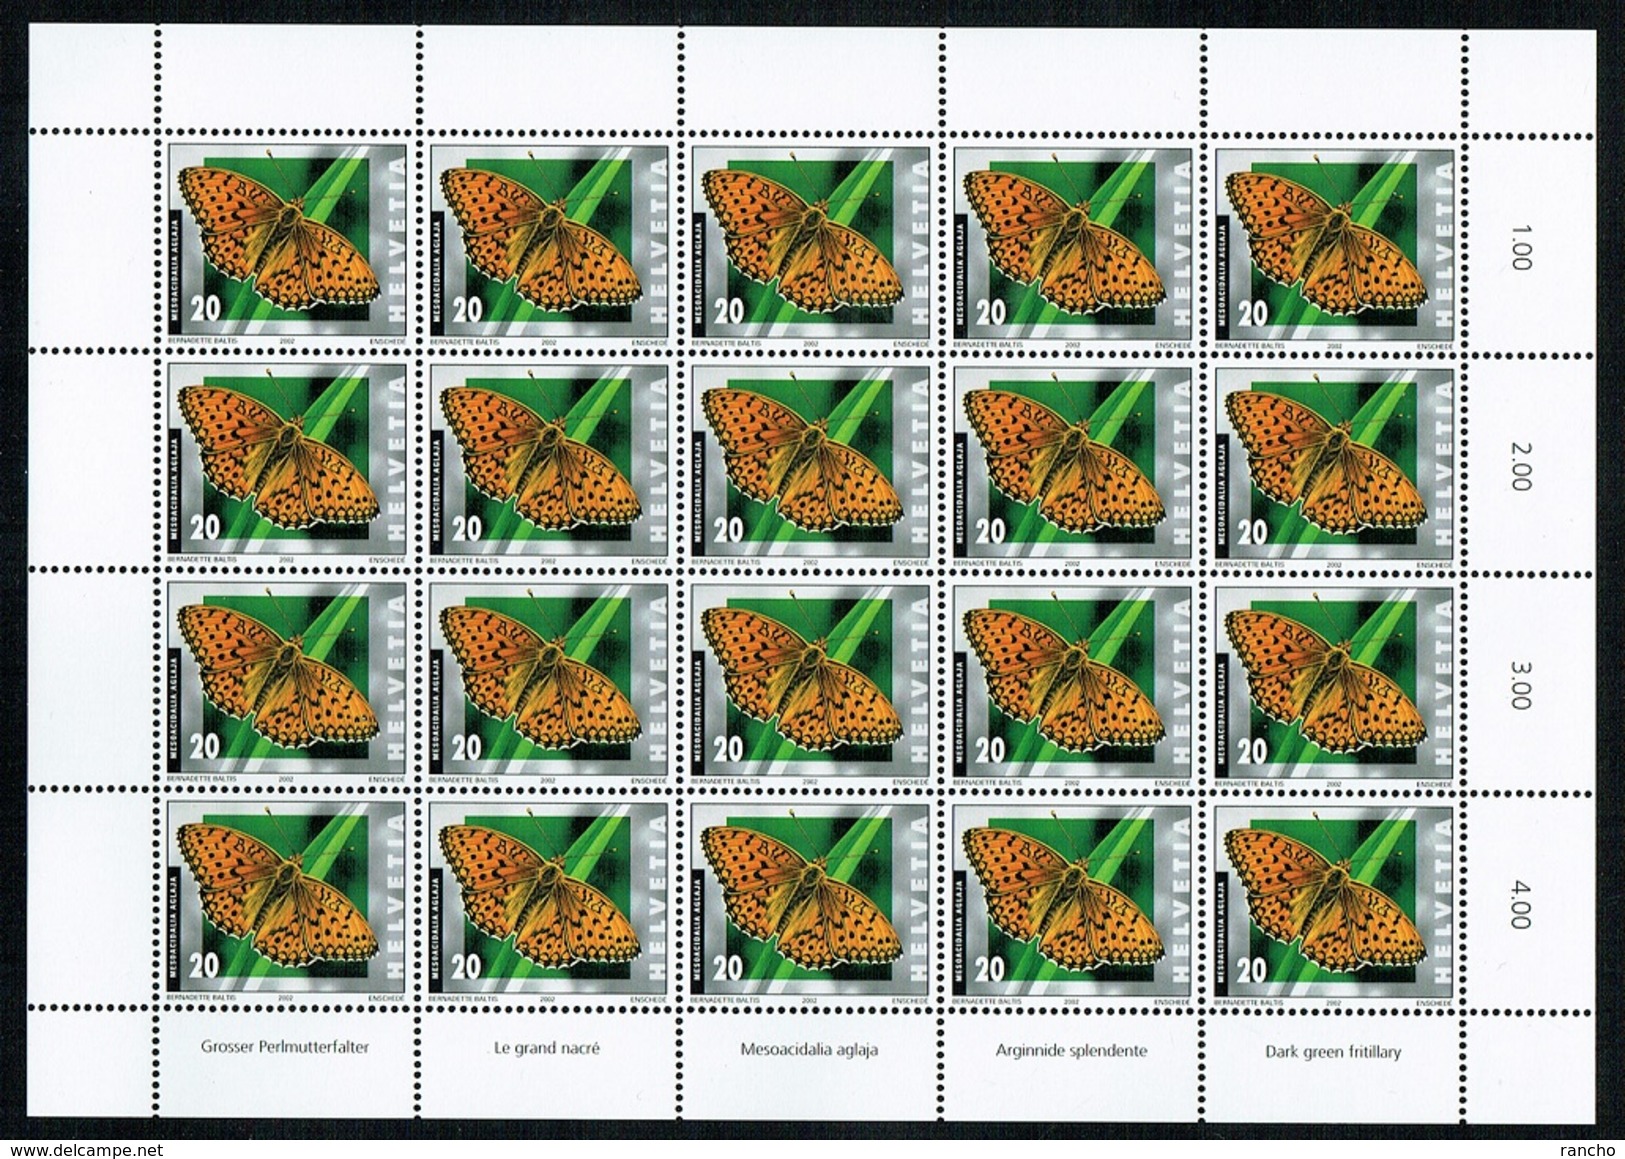 ** SERIE 4xPLANCHES 2002 COLLECTIONS NEUFS C/.S.B.K. Nr:1061/1064. Y&TELLIER Nr:1727/1730. MICHEL Nr:1802/1805.** - Unused Stamps